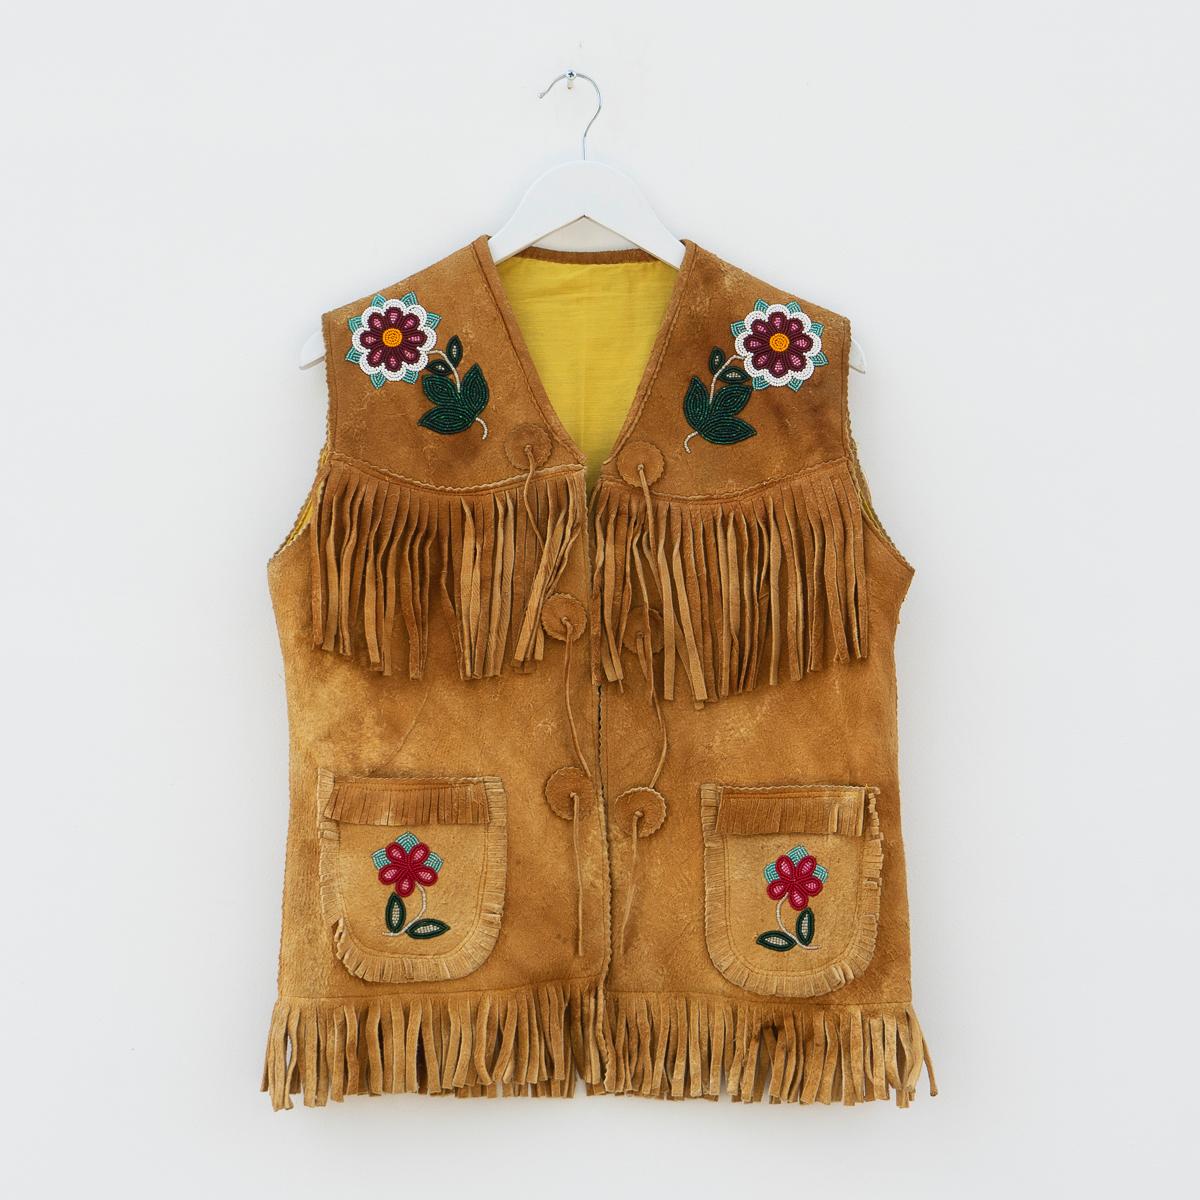 TRADITIONAL OJIBWAY TRIBAL WAISTCOAT WITH FLORAL BEAD DETAILING
Originating from the Ojibwe (Ojibwa) people from what is currently Southern Canada and the North Mid-Western United States.

Handmade from smoked moose leather with tassel